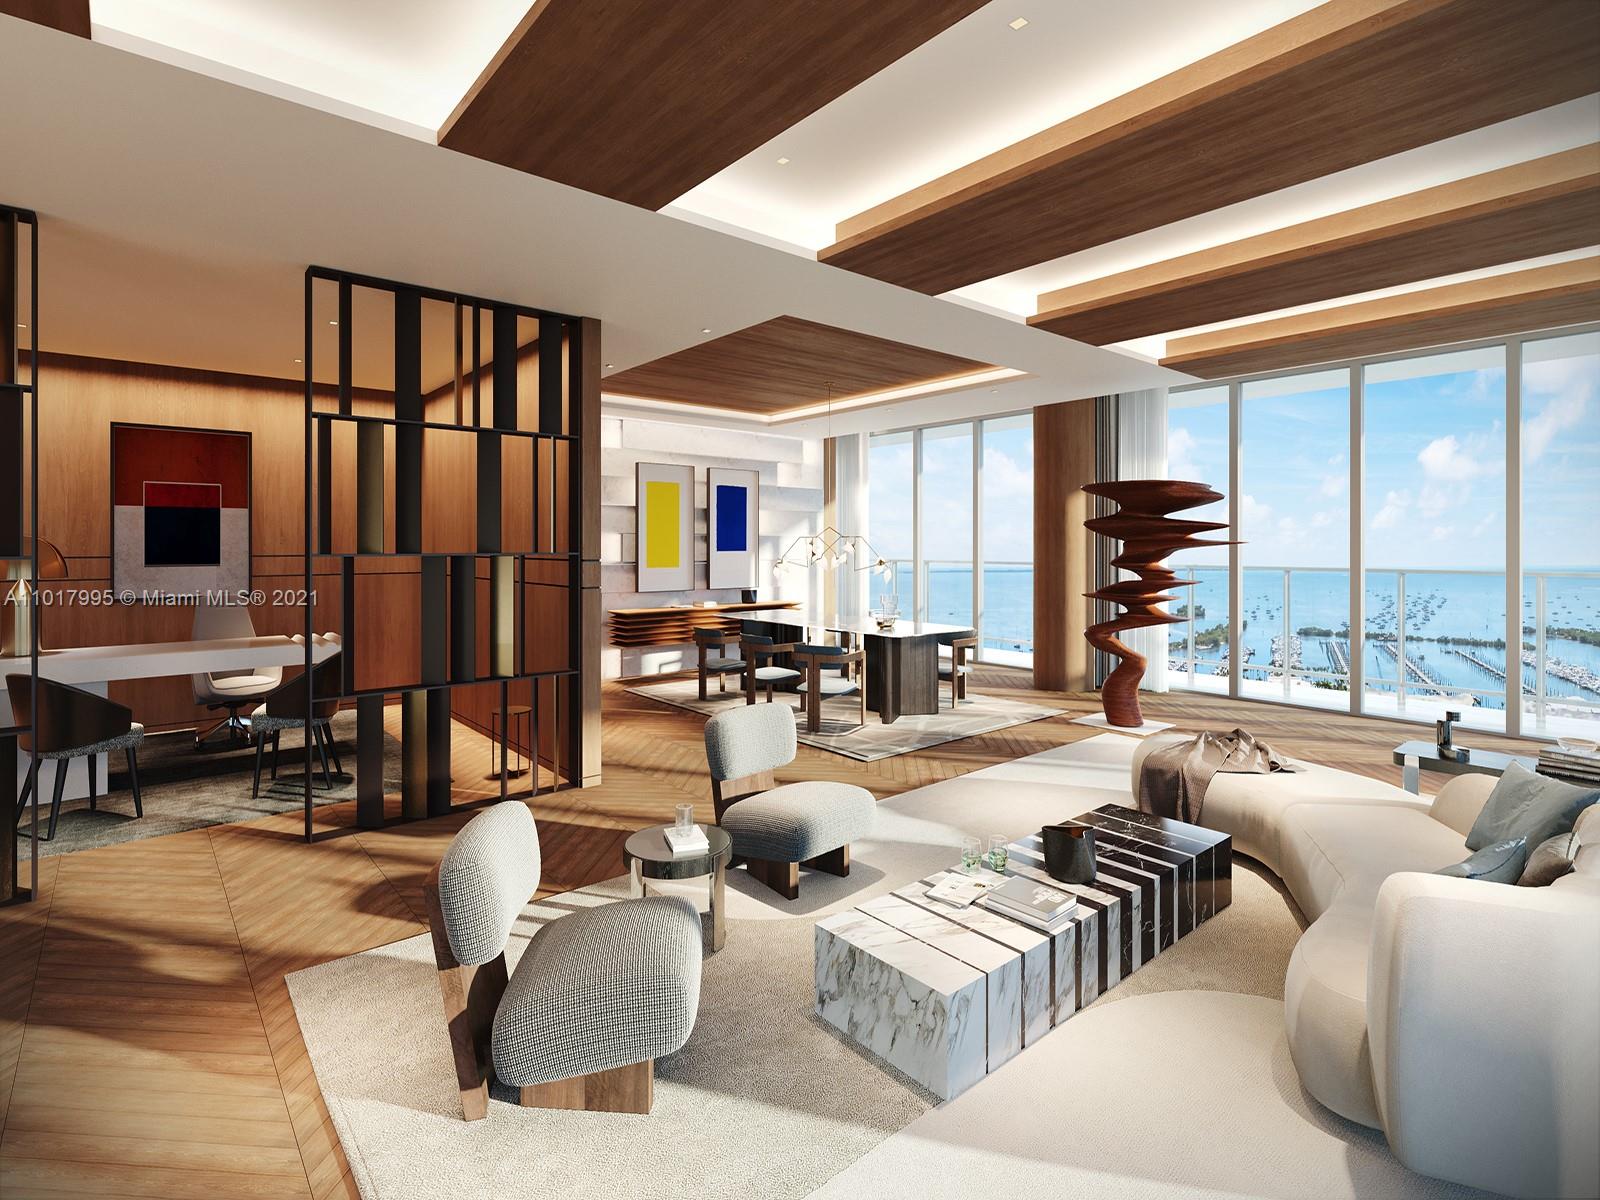 This full-floor penthouse at Grove at Grand Bay has been conceptualized by Tamara Feldman Design to instill depth and character to this architectural marvel by Bjarke Ingels which twists exotically on the Coconut Grove skyline. Spanning 10,118 square feet of interior space, the proposed design combines various natural elements such as herringbone floors and wood veneer ceilings with cove lighting in the living room and illuminated limestone in the dining room, with oversized bronze doors leading to the office. Under the 12-foot ceilings, the hurricane impact glass walls offer spectacular views of the Coconut Grove waterfront, enveloped by long, deep balconies. Meanwhile, one floor up, an exquisite private roof deck with an oversized pool is your arcadian oasis.